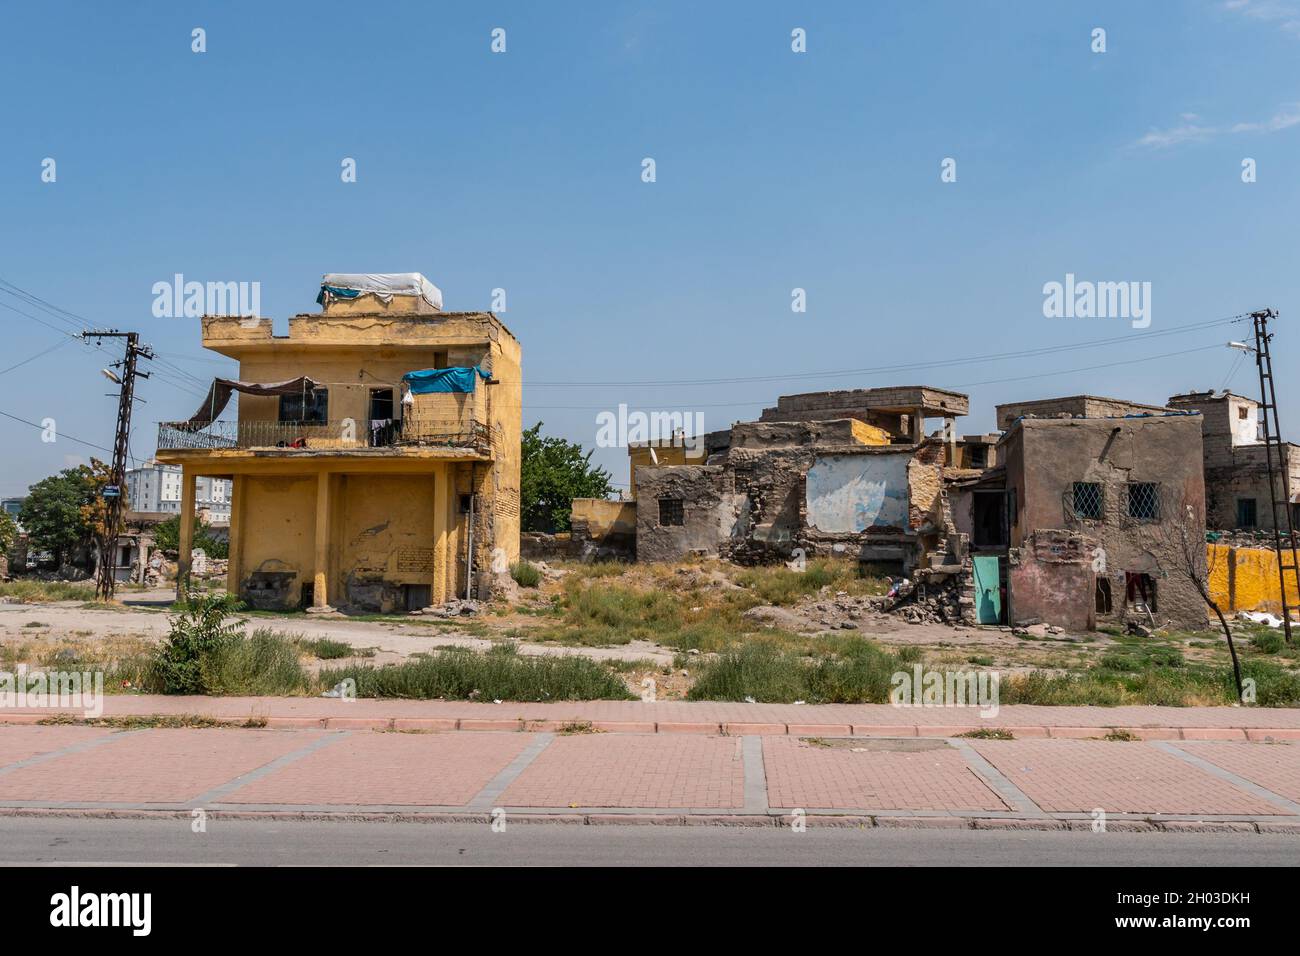 Kayseri Abandoned Shabby Houses Breathtaking Picturesque View on a Blue Sky Day in Summer Stock Photo